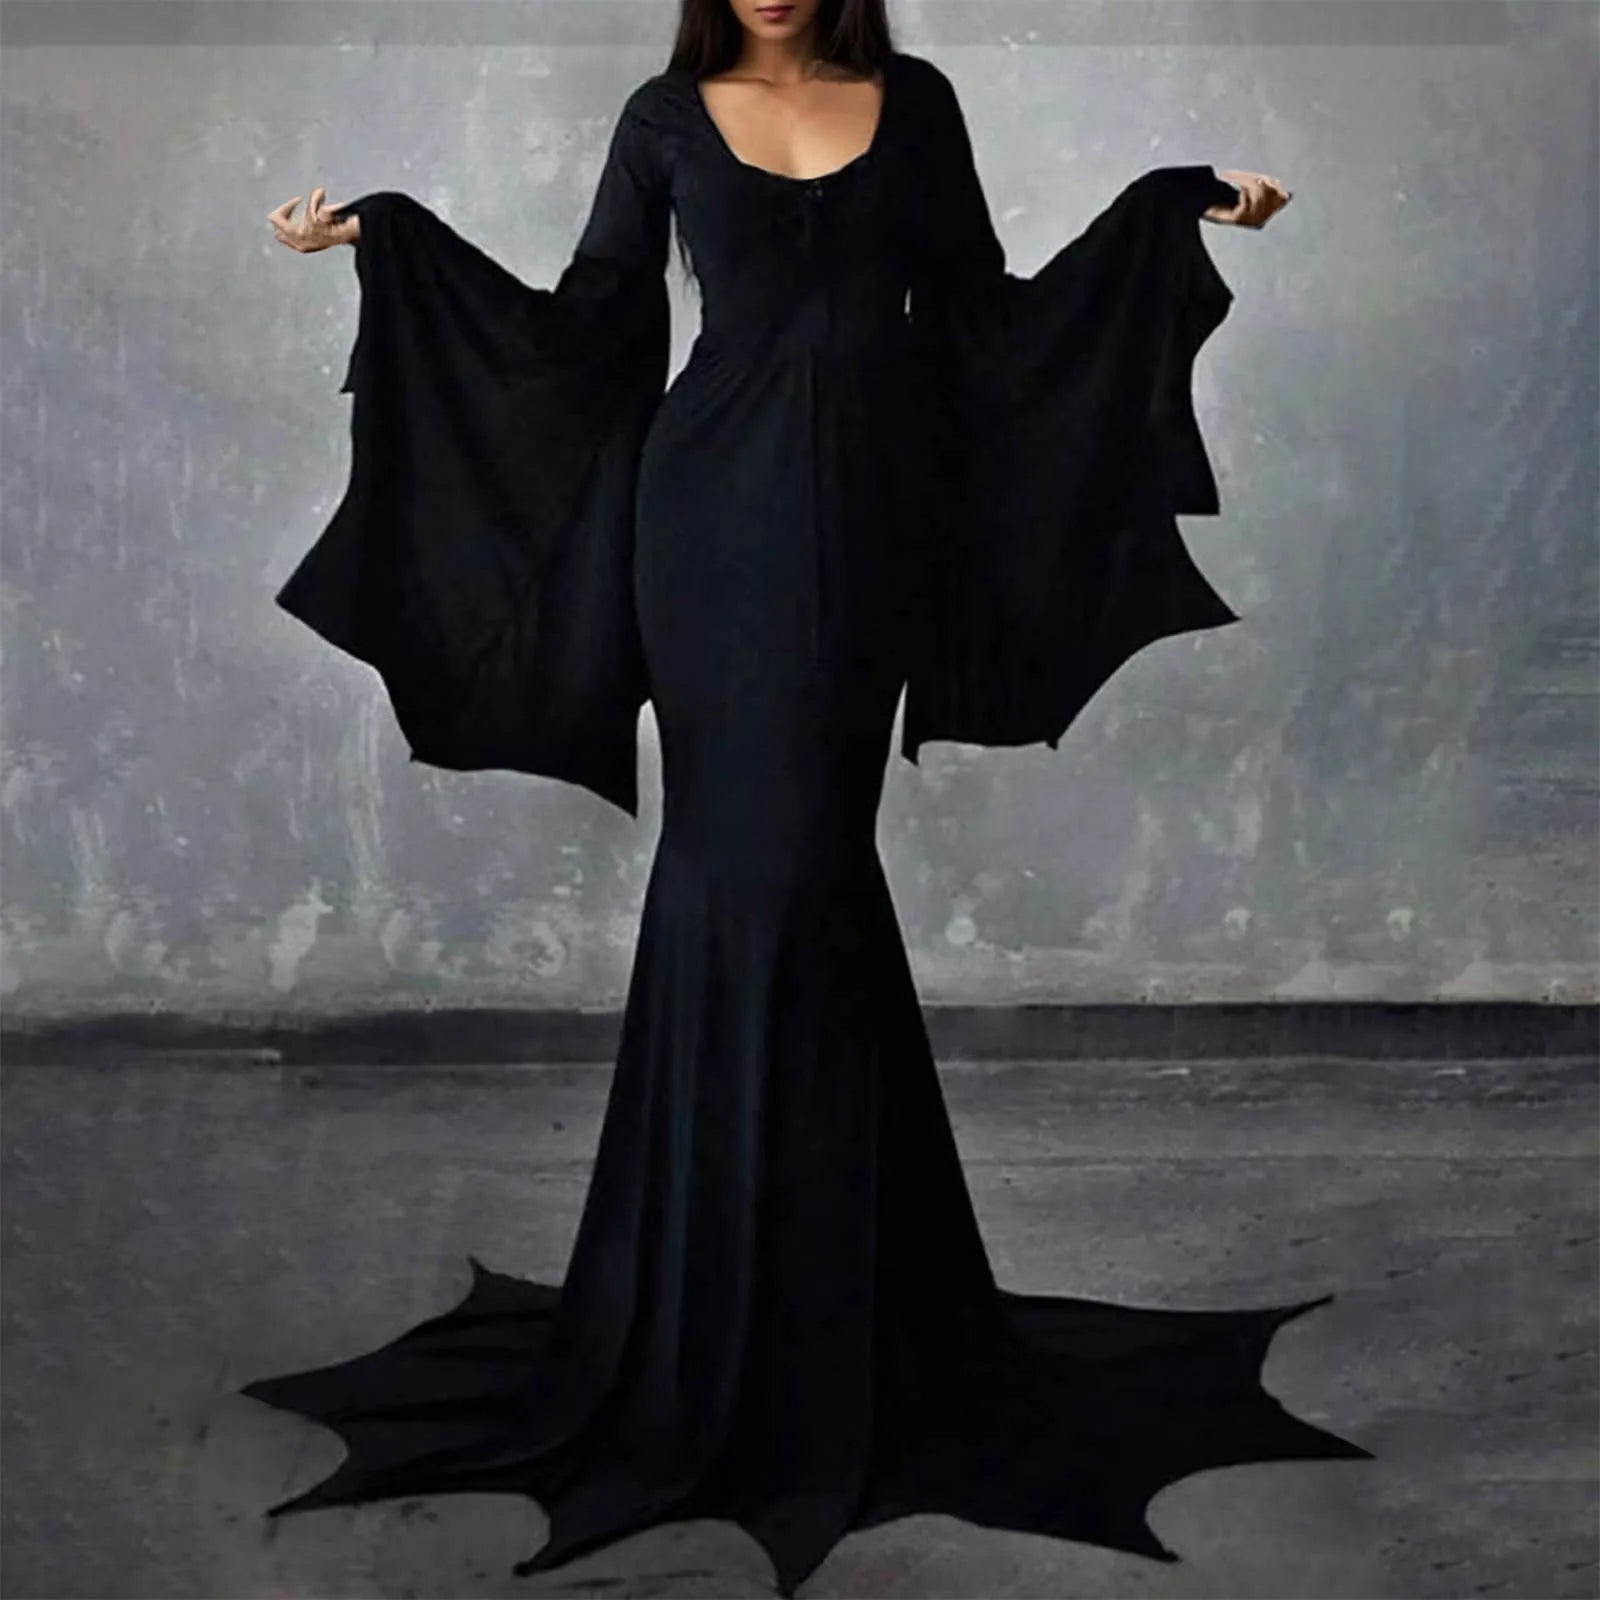 Witchy Costume Morticia Addams Wednesday Train Floor Dress Women Halloween Witch Dark Outfit Gothic Gown Robe Horror For Adult